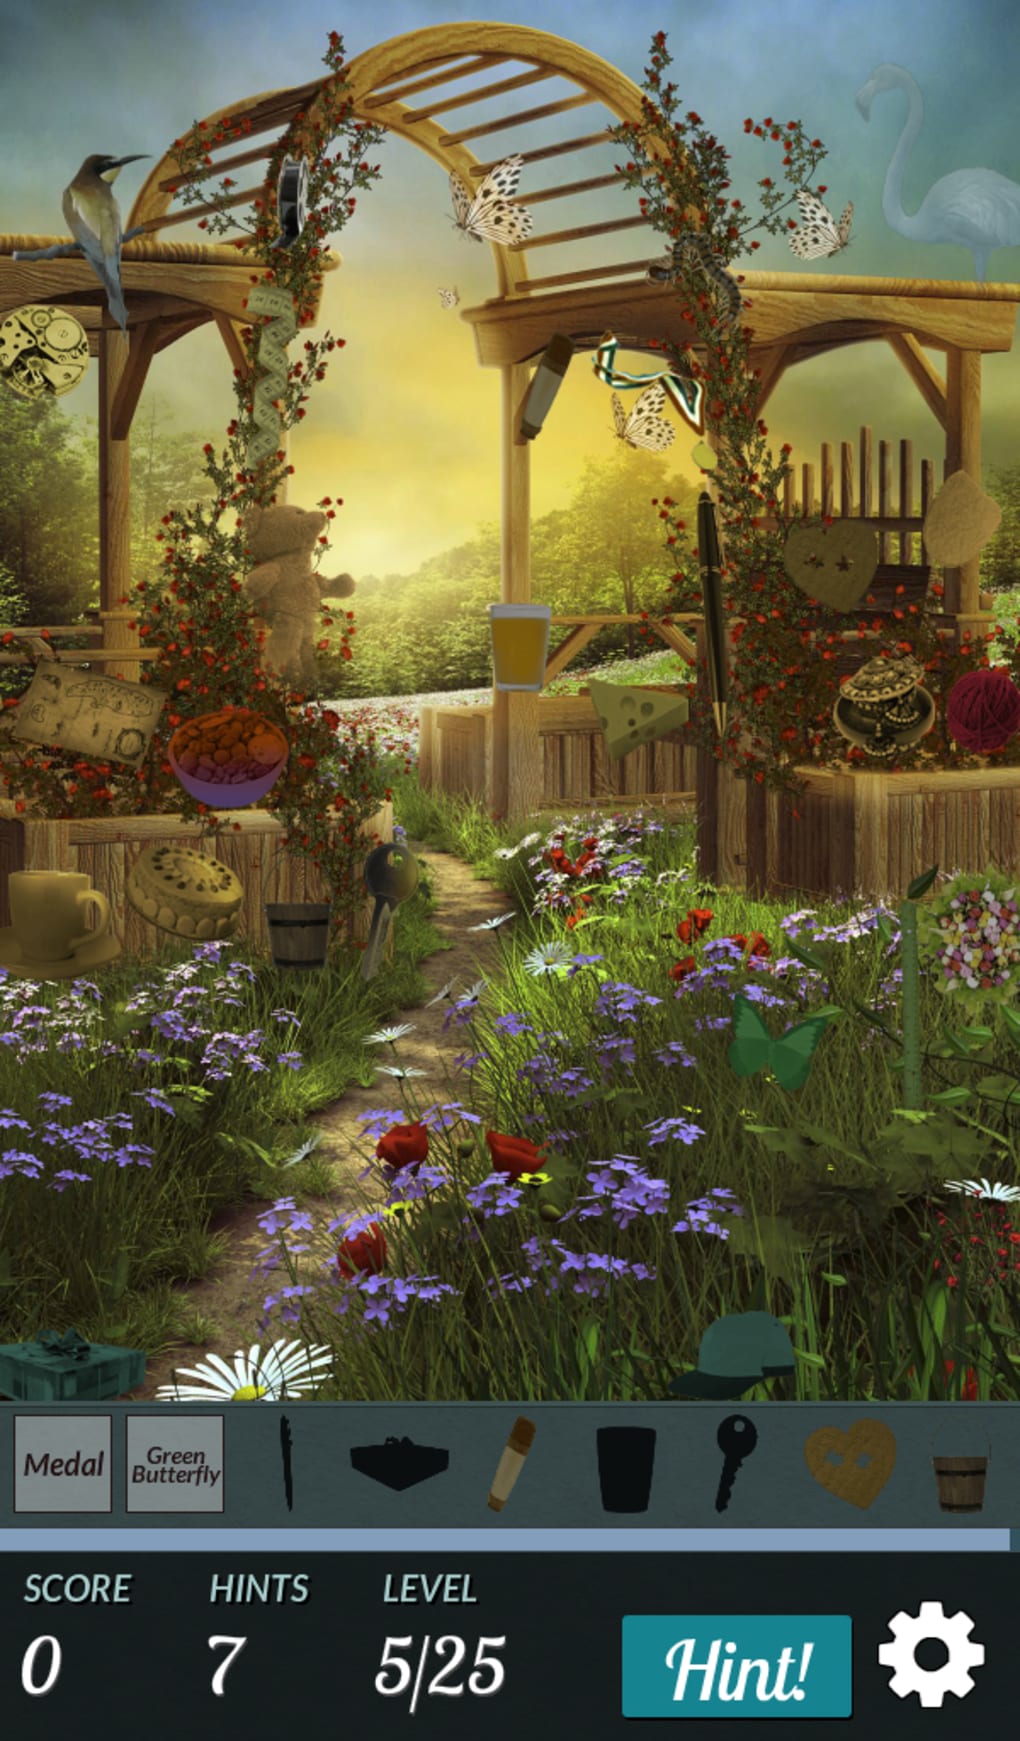 Hidden Objects Summer Time - APK Download for Android